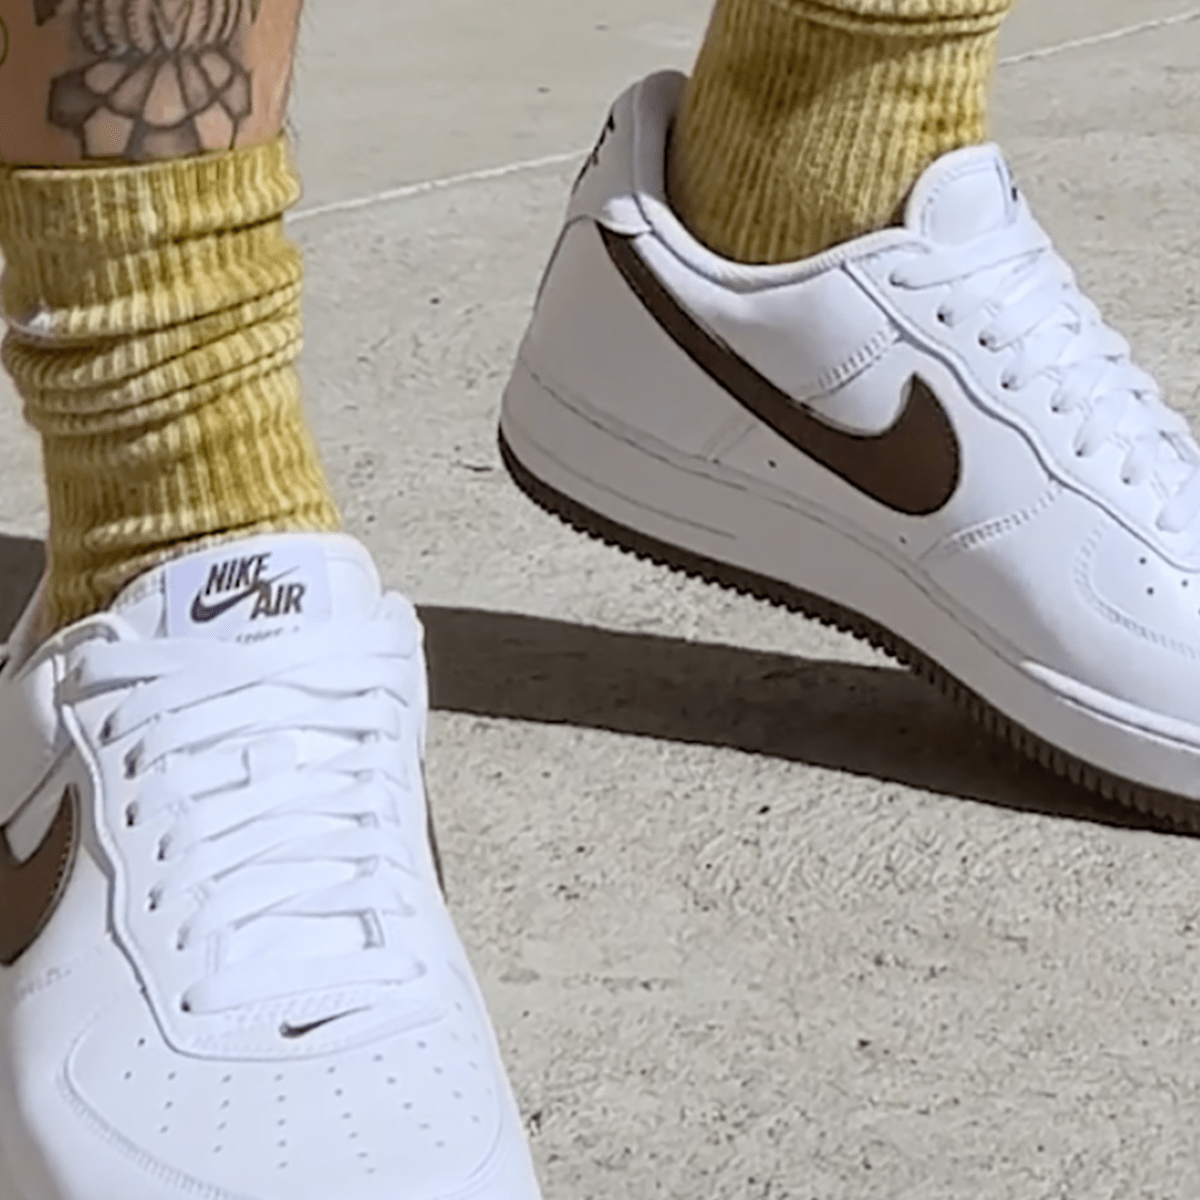 Save on a New Pair of Air Force 1s at Nike - Men's Journal